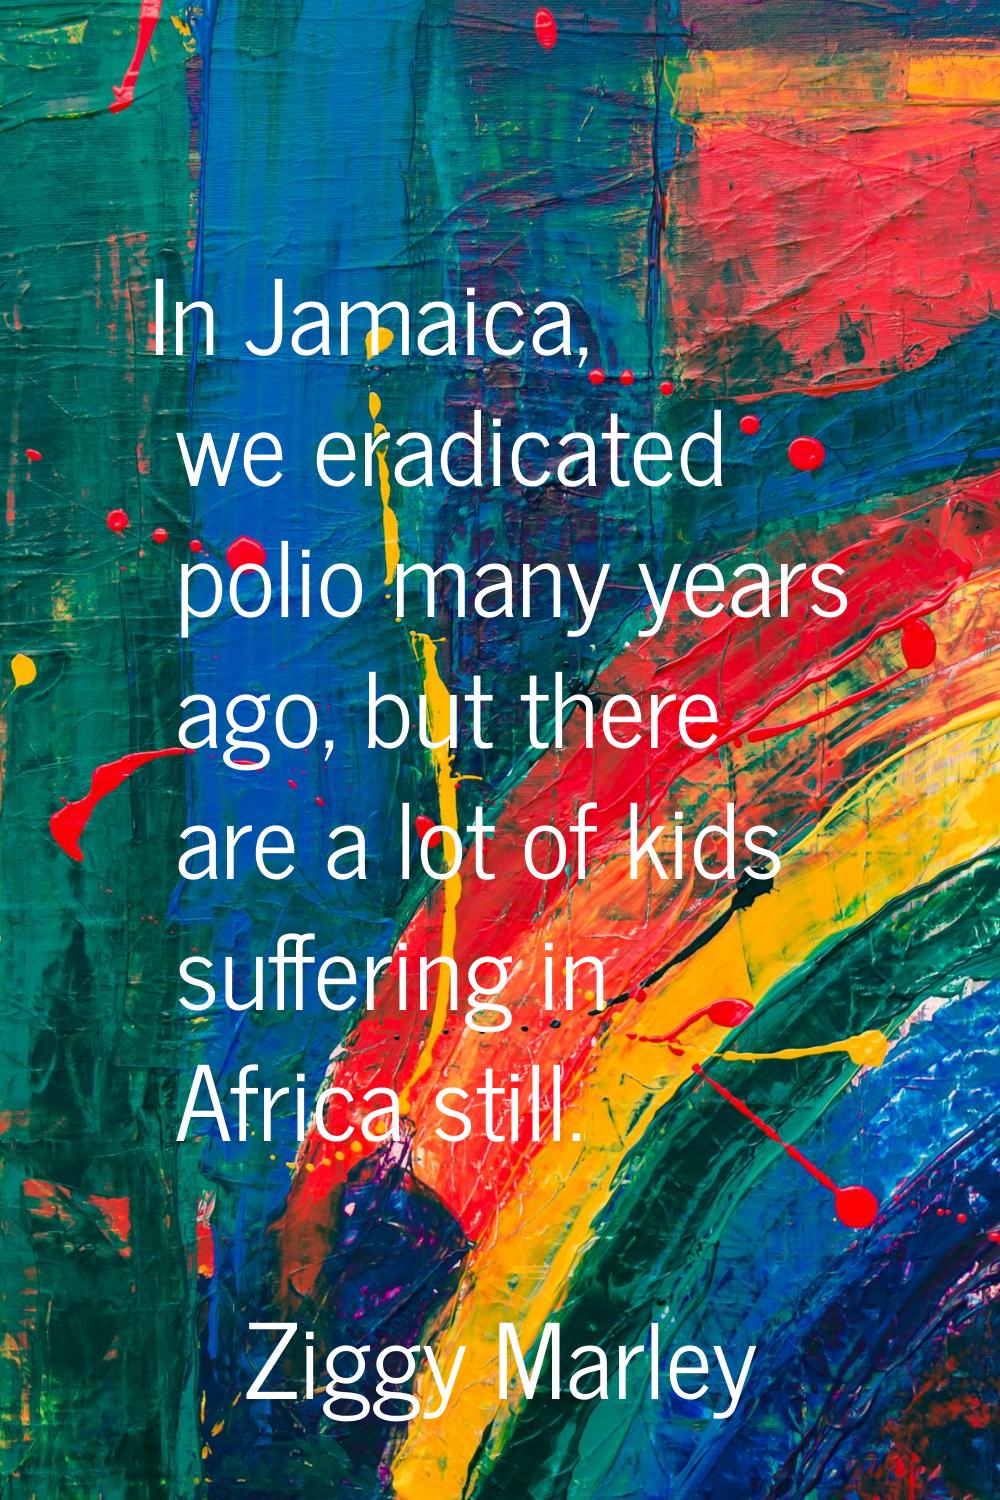 In Jamaica, we eradicated polio many years ago, but there are a lot of kids suffering in Africa sti